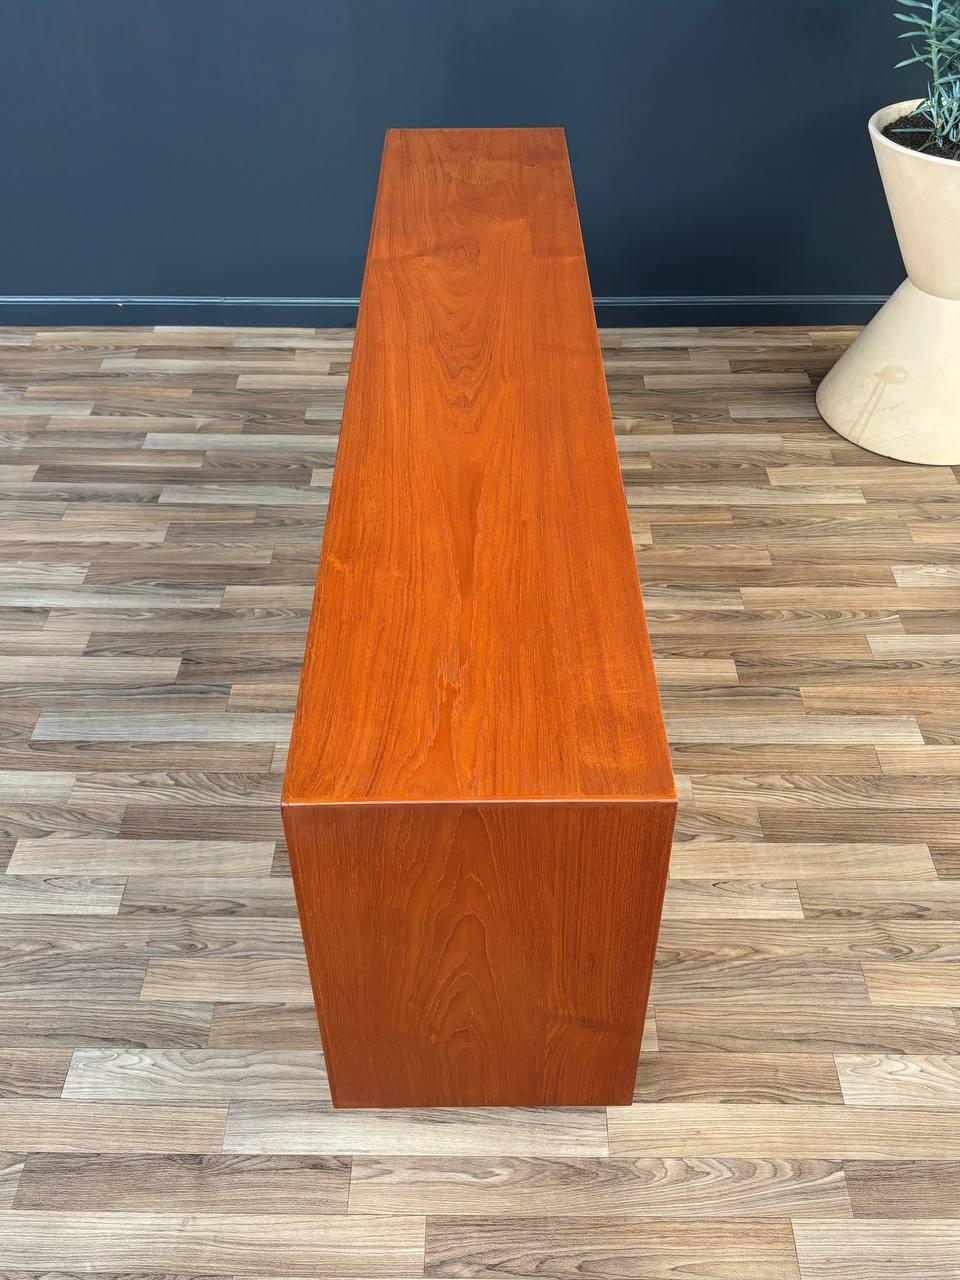 Newly Refinished - Mid-Century Danish Modern Teak Bookcase with Glass Doors In Excellent Condition For Sale In Los Angeles, CA